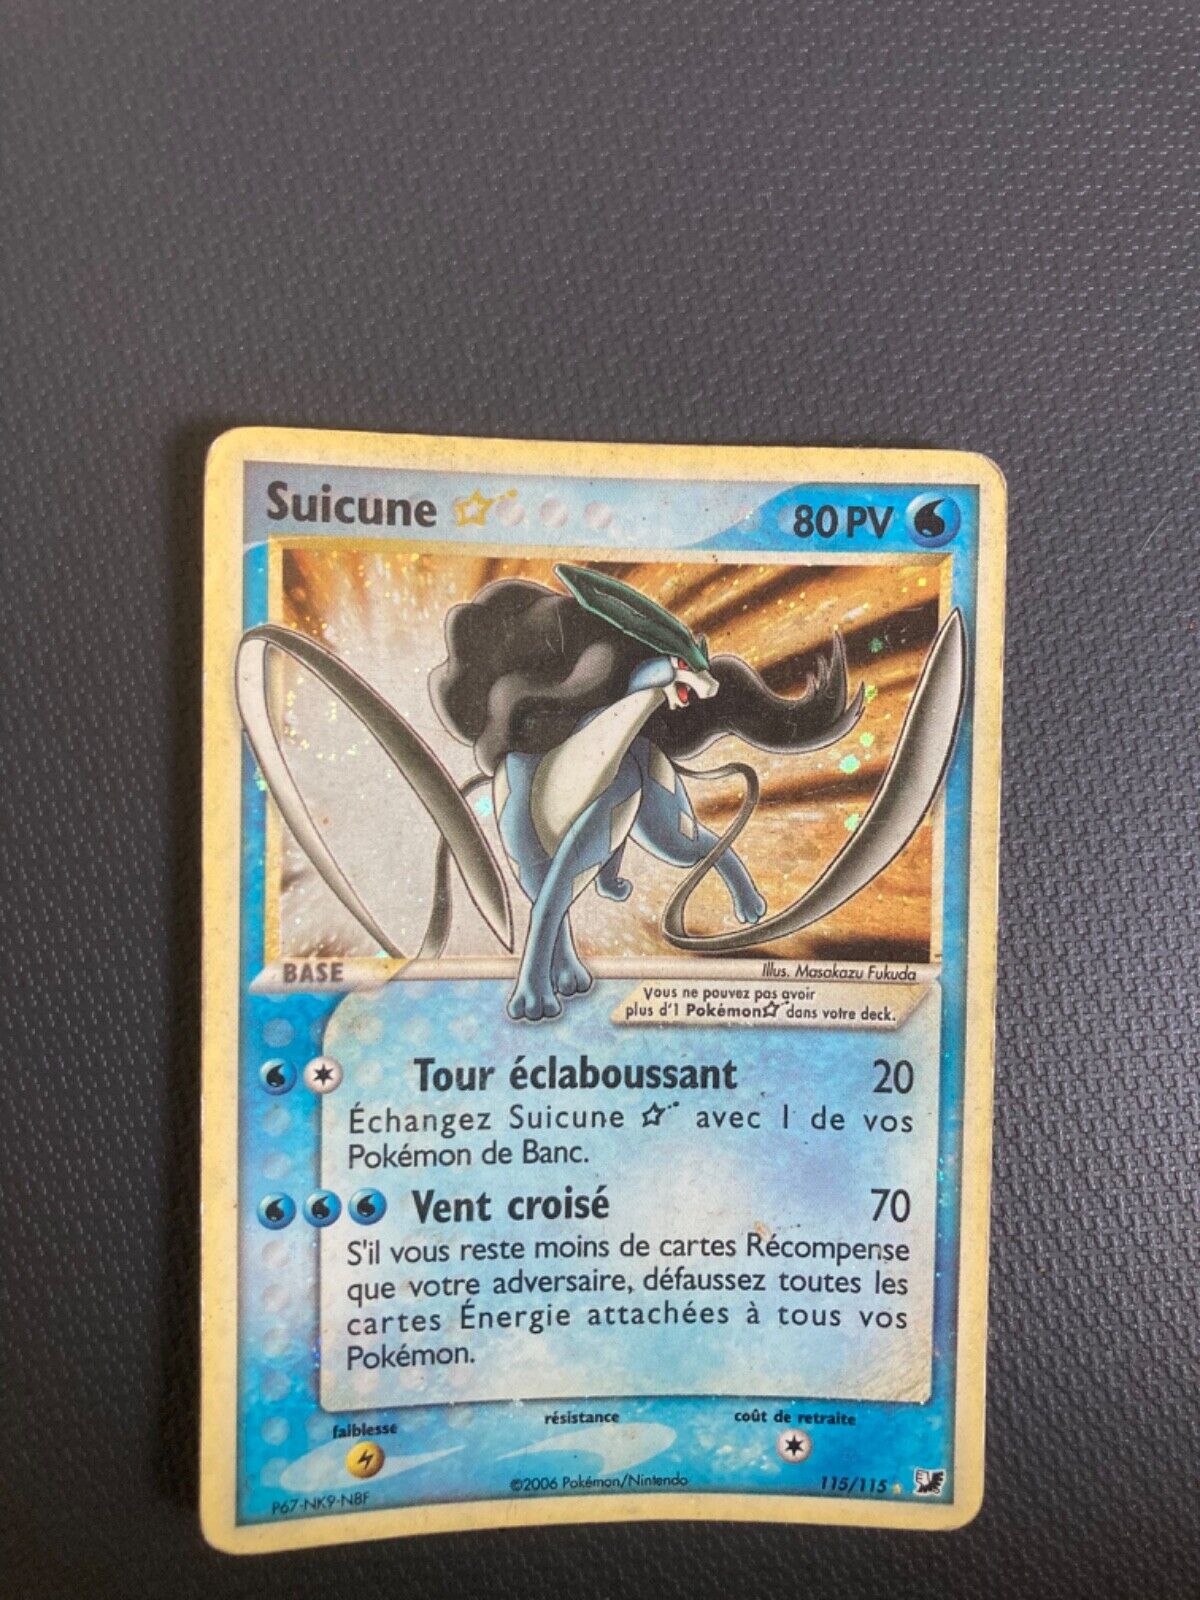 2006 Pokemon Card Suicune Star 115/115 Holographic Ultra Rare in FRENCH